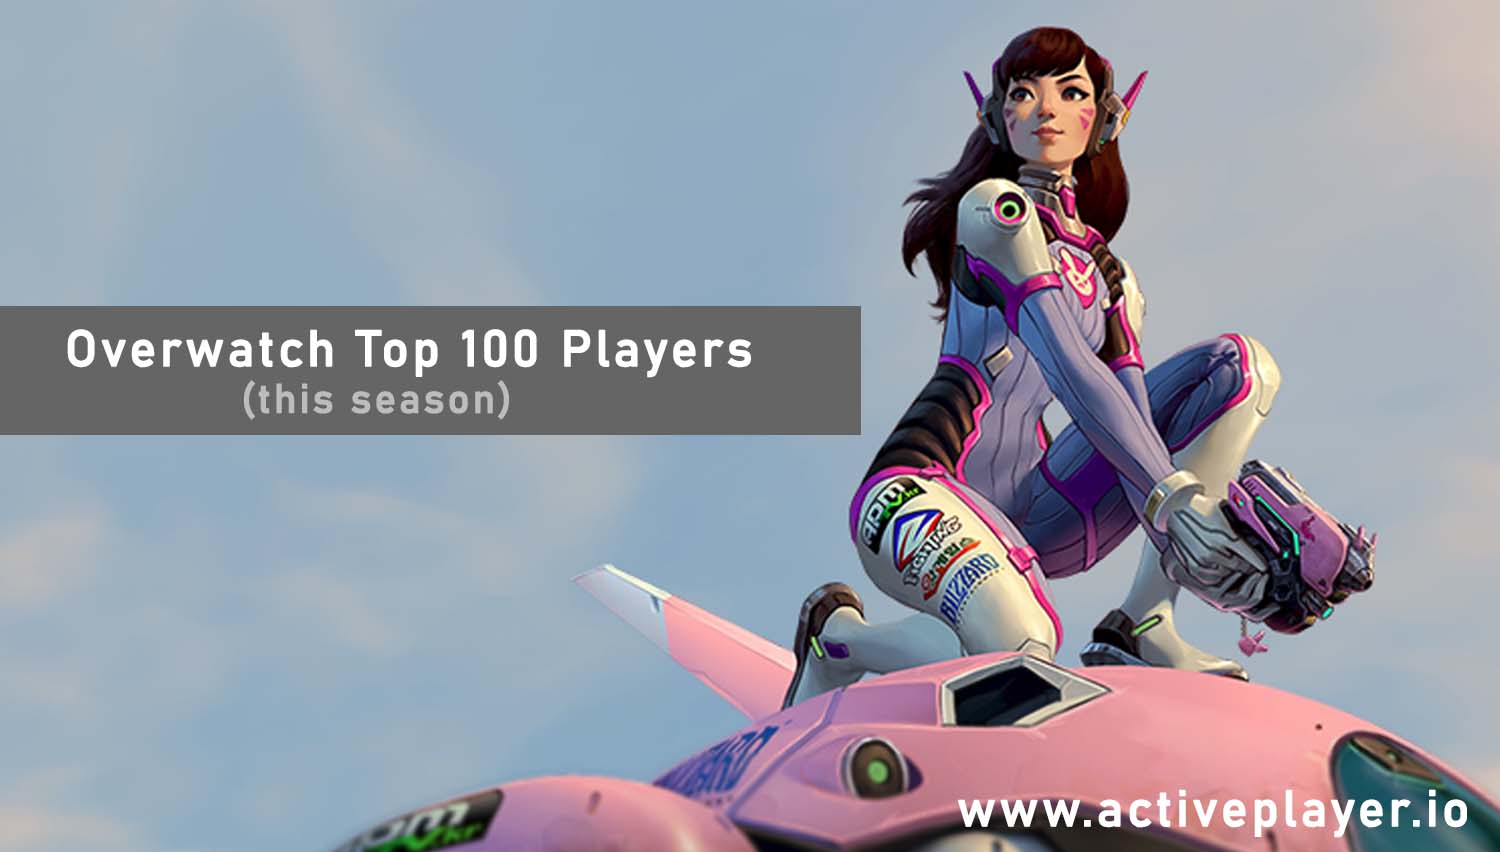 Overwatch Ranking: Top Performing Players this Season